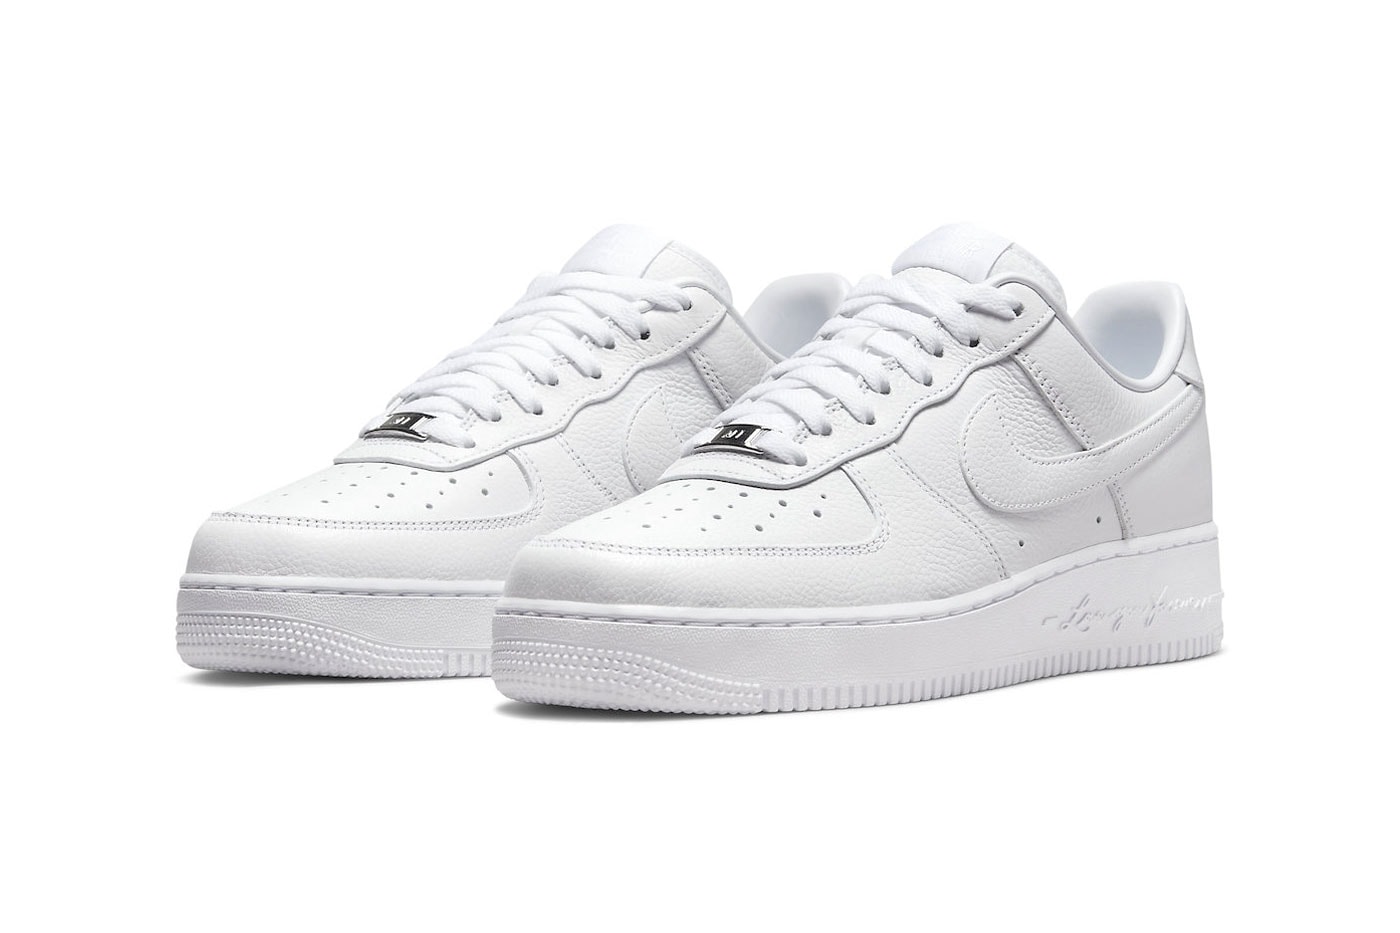 Drake NOCTA Certified Lover Boy Nike Air Force 1 CZ8065-100 Price Release Info